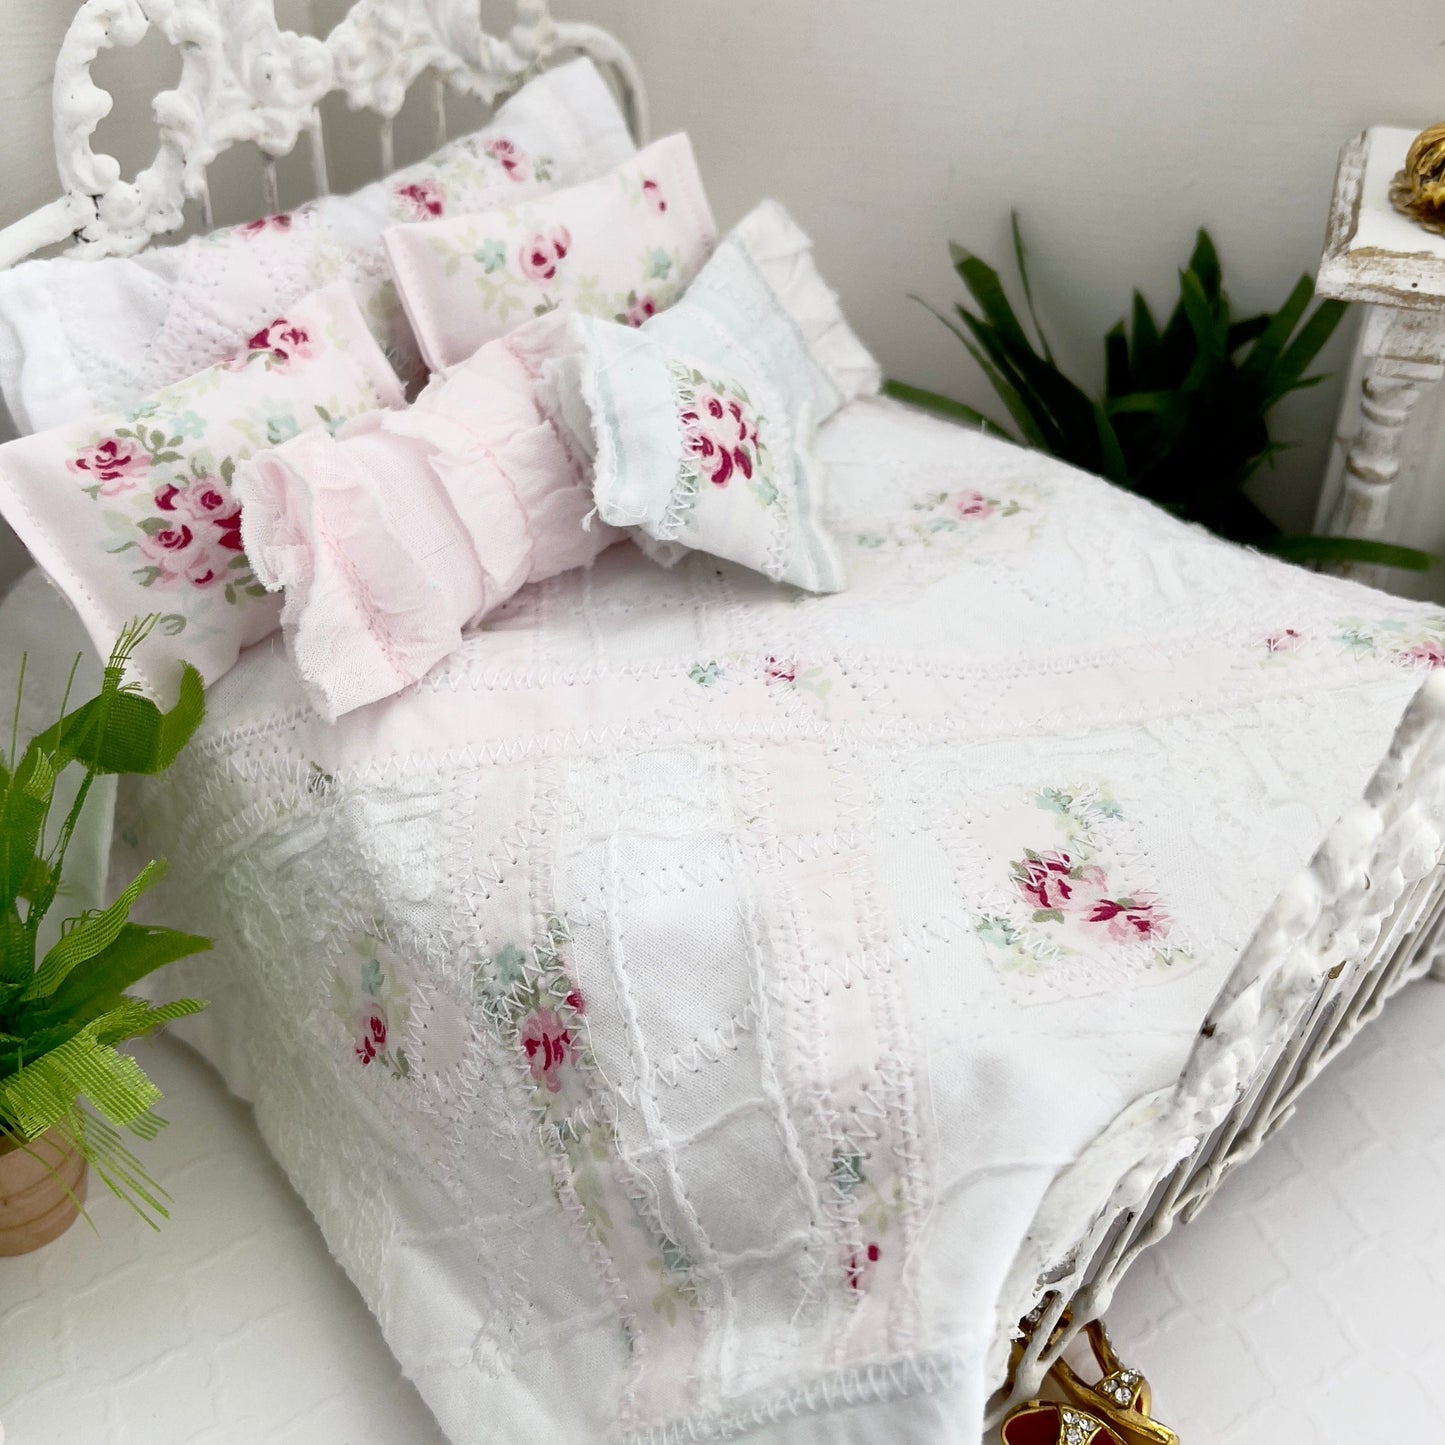 Chantallena Doll House Copy of Shabby Cottage | Eight Piece Blue and Pink Floral Bedding Set | Brooke